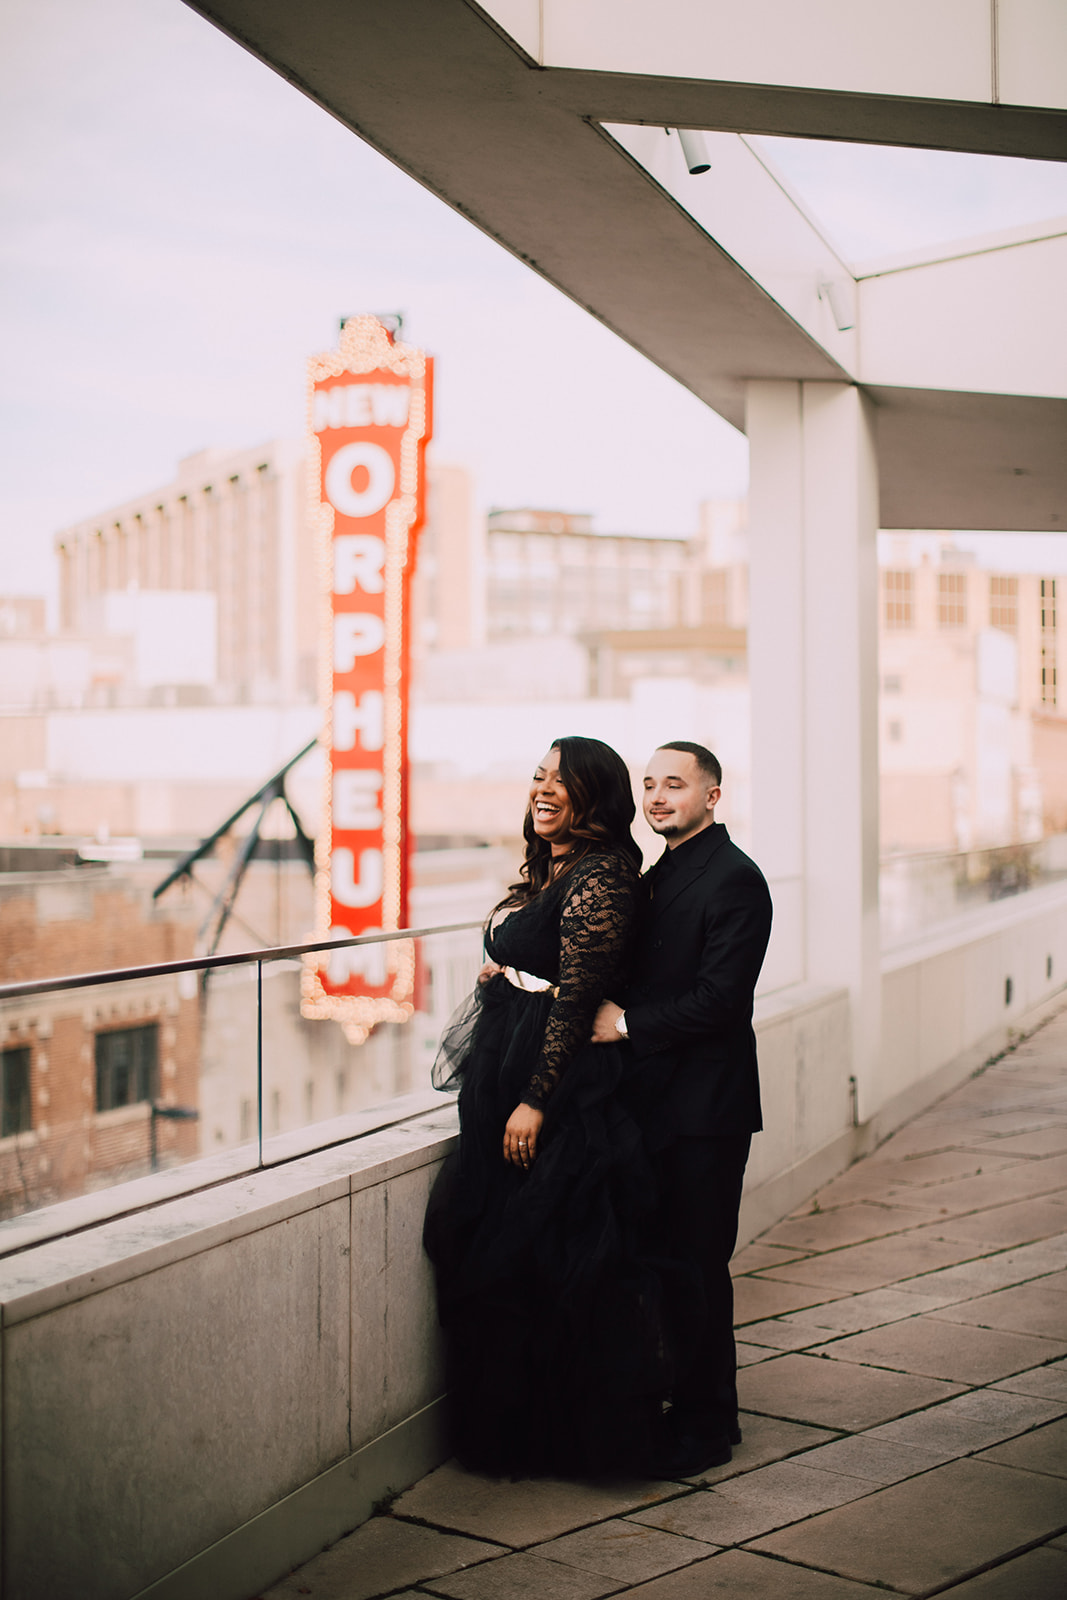 A couple shares a candid moment together on MMoCA rooftop. Engagement photos captured by Madison wedding photographer O & B Photo Co